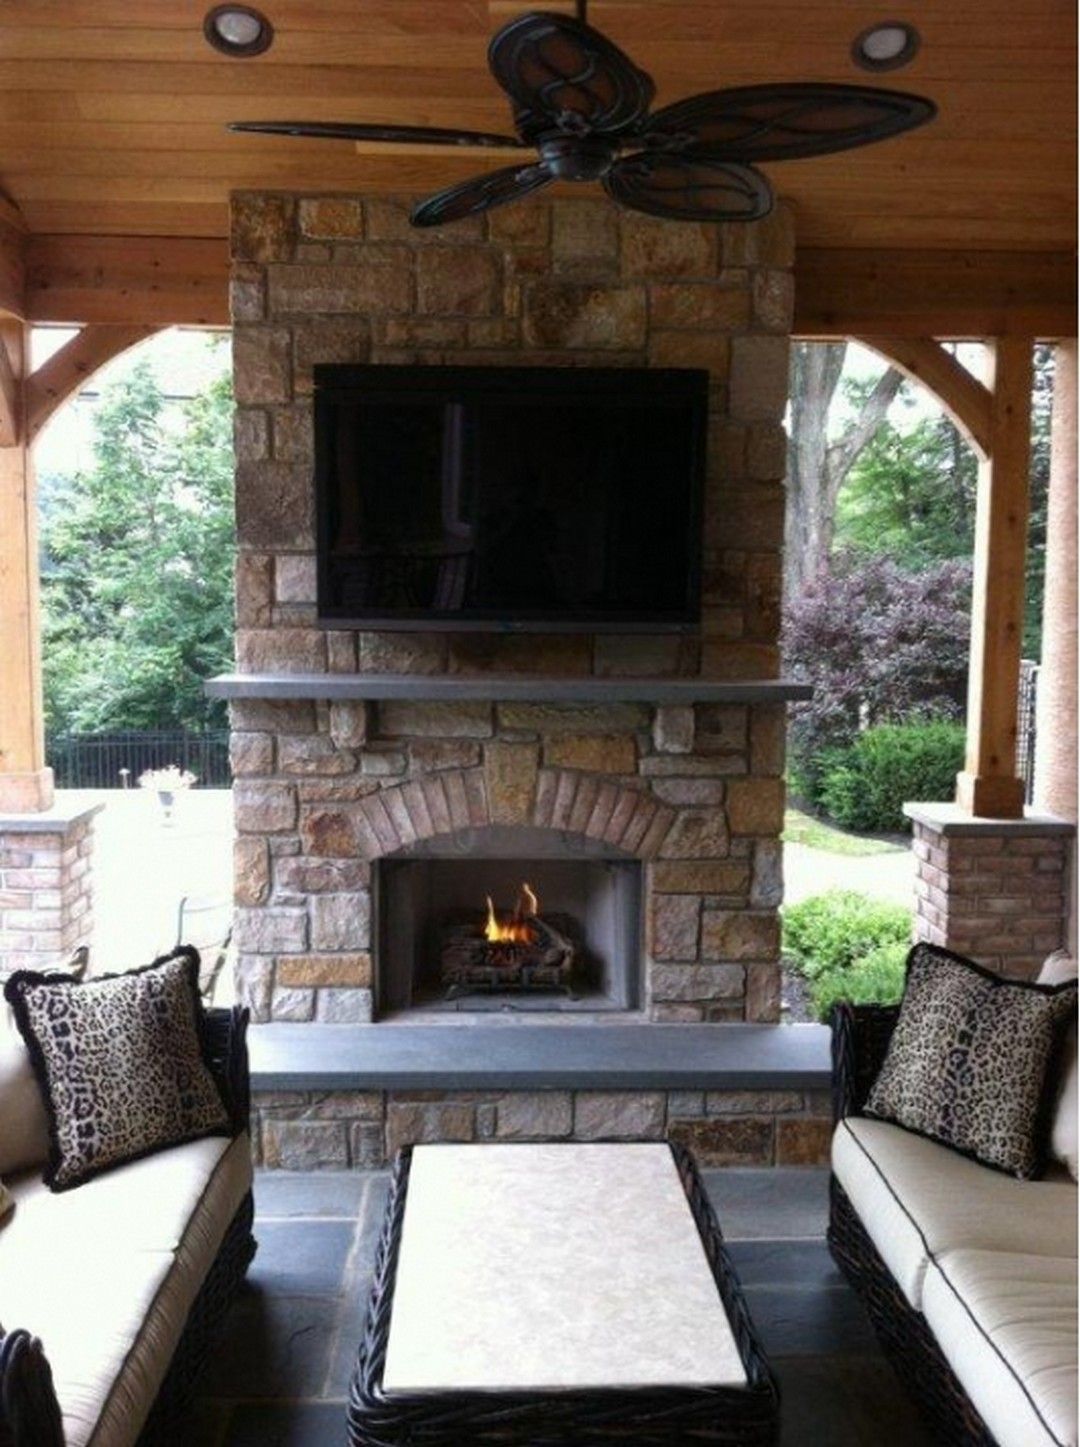 Graceful Outdoor Fireplaces Ideas For Backyard